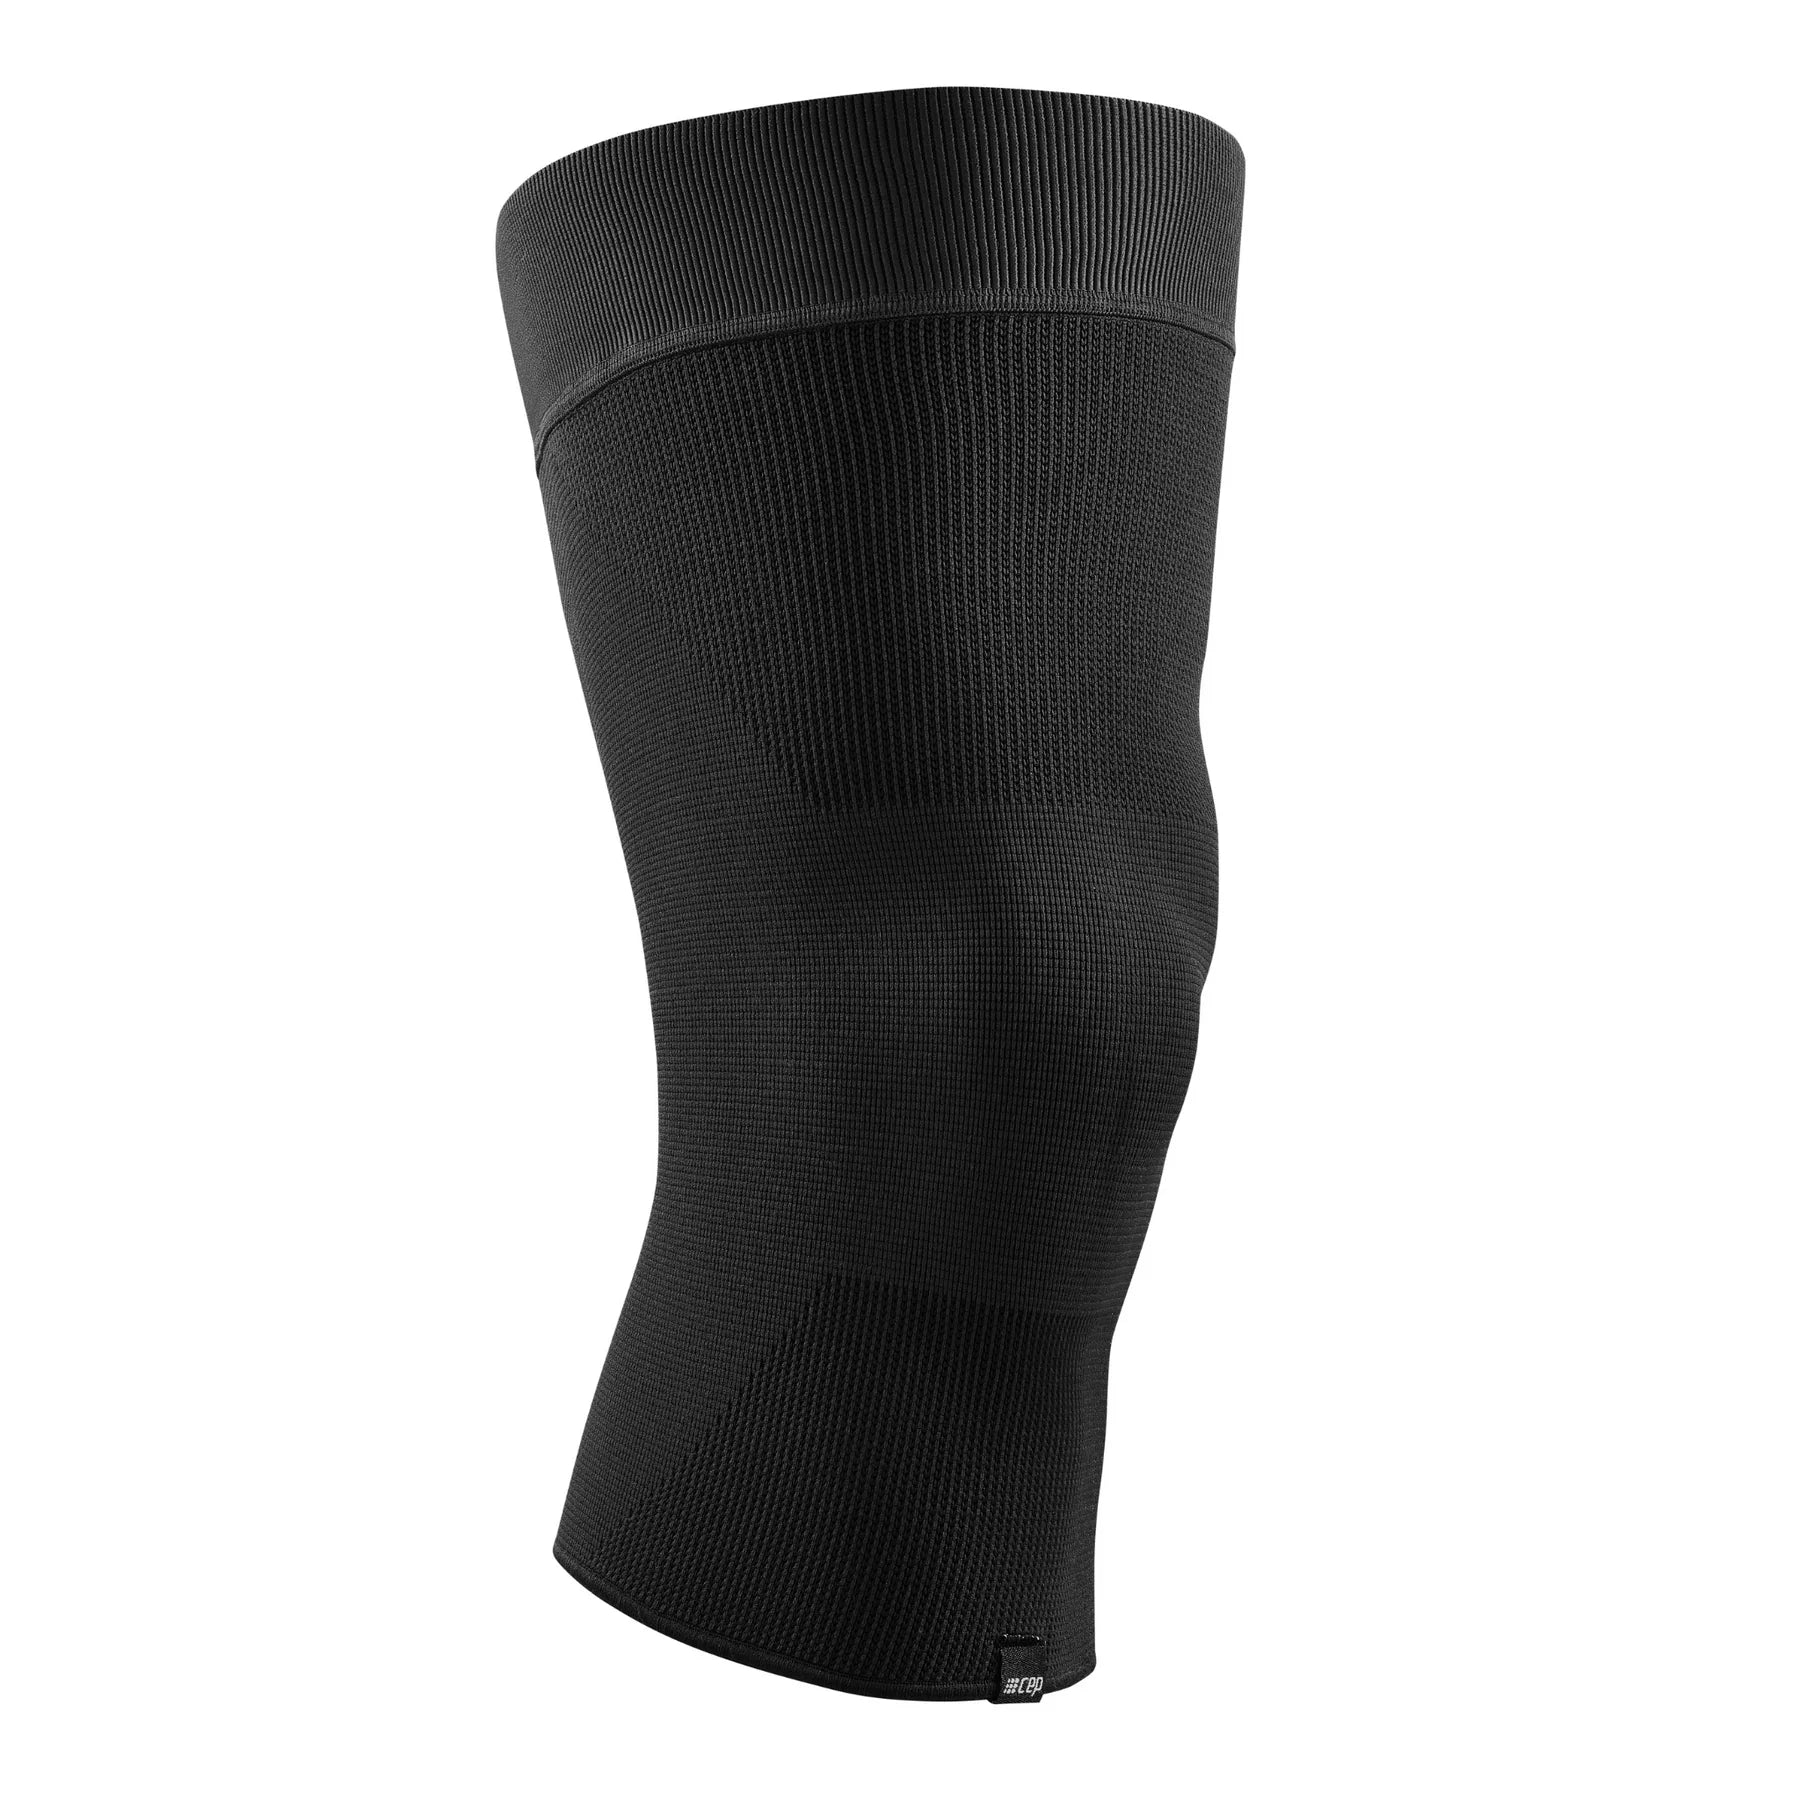 Under Armour Compression Sleeves in Sports Medicine 